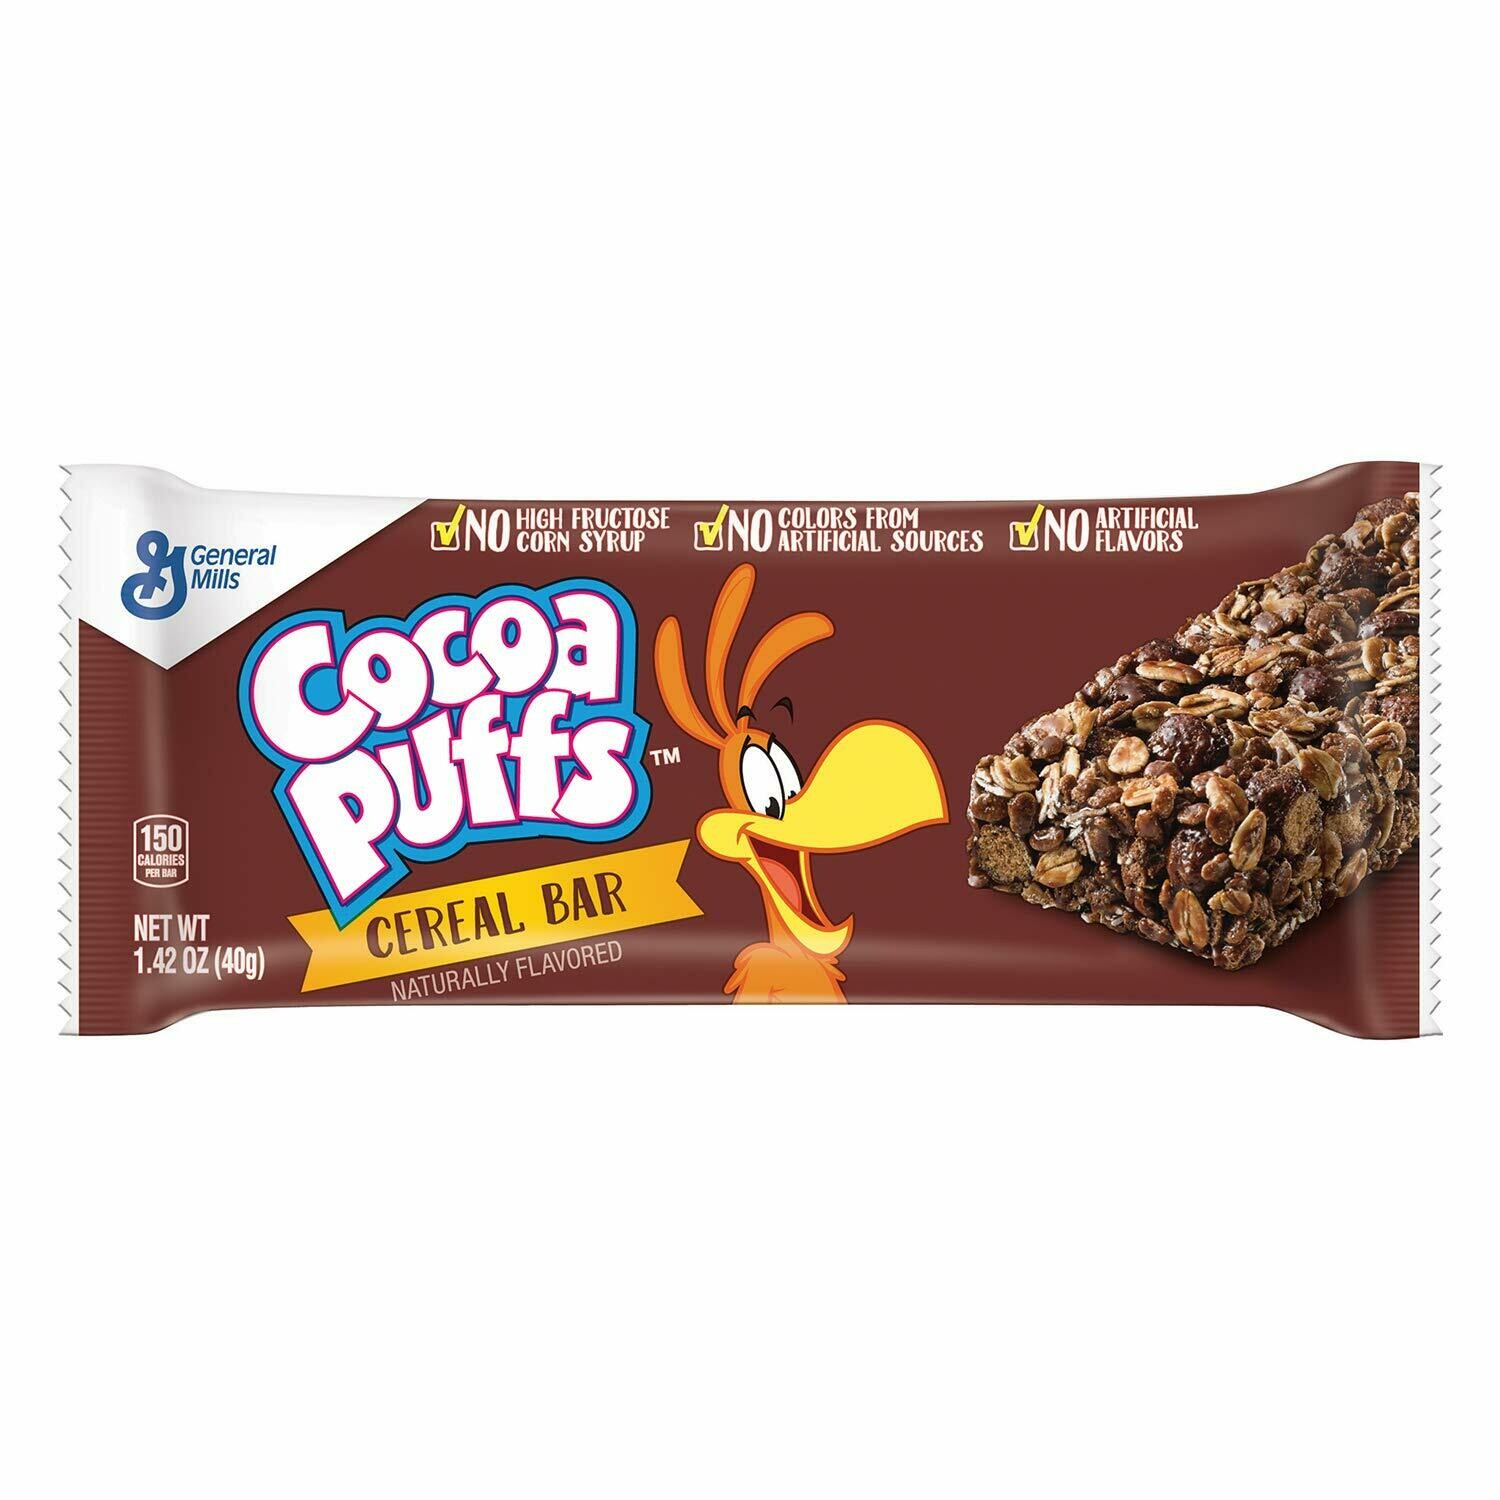 Cereal Bars     Cocoa Puffs King Size single